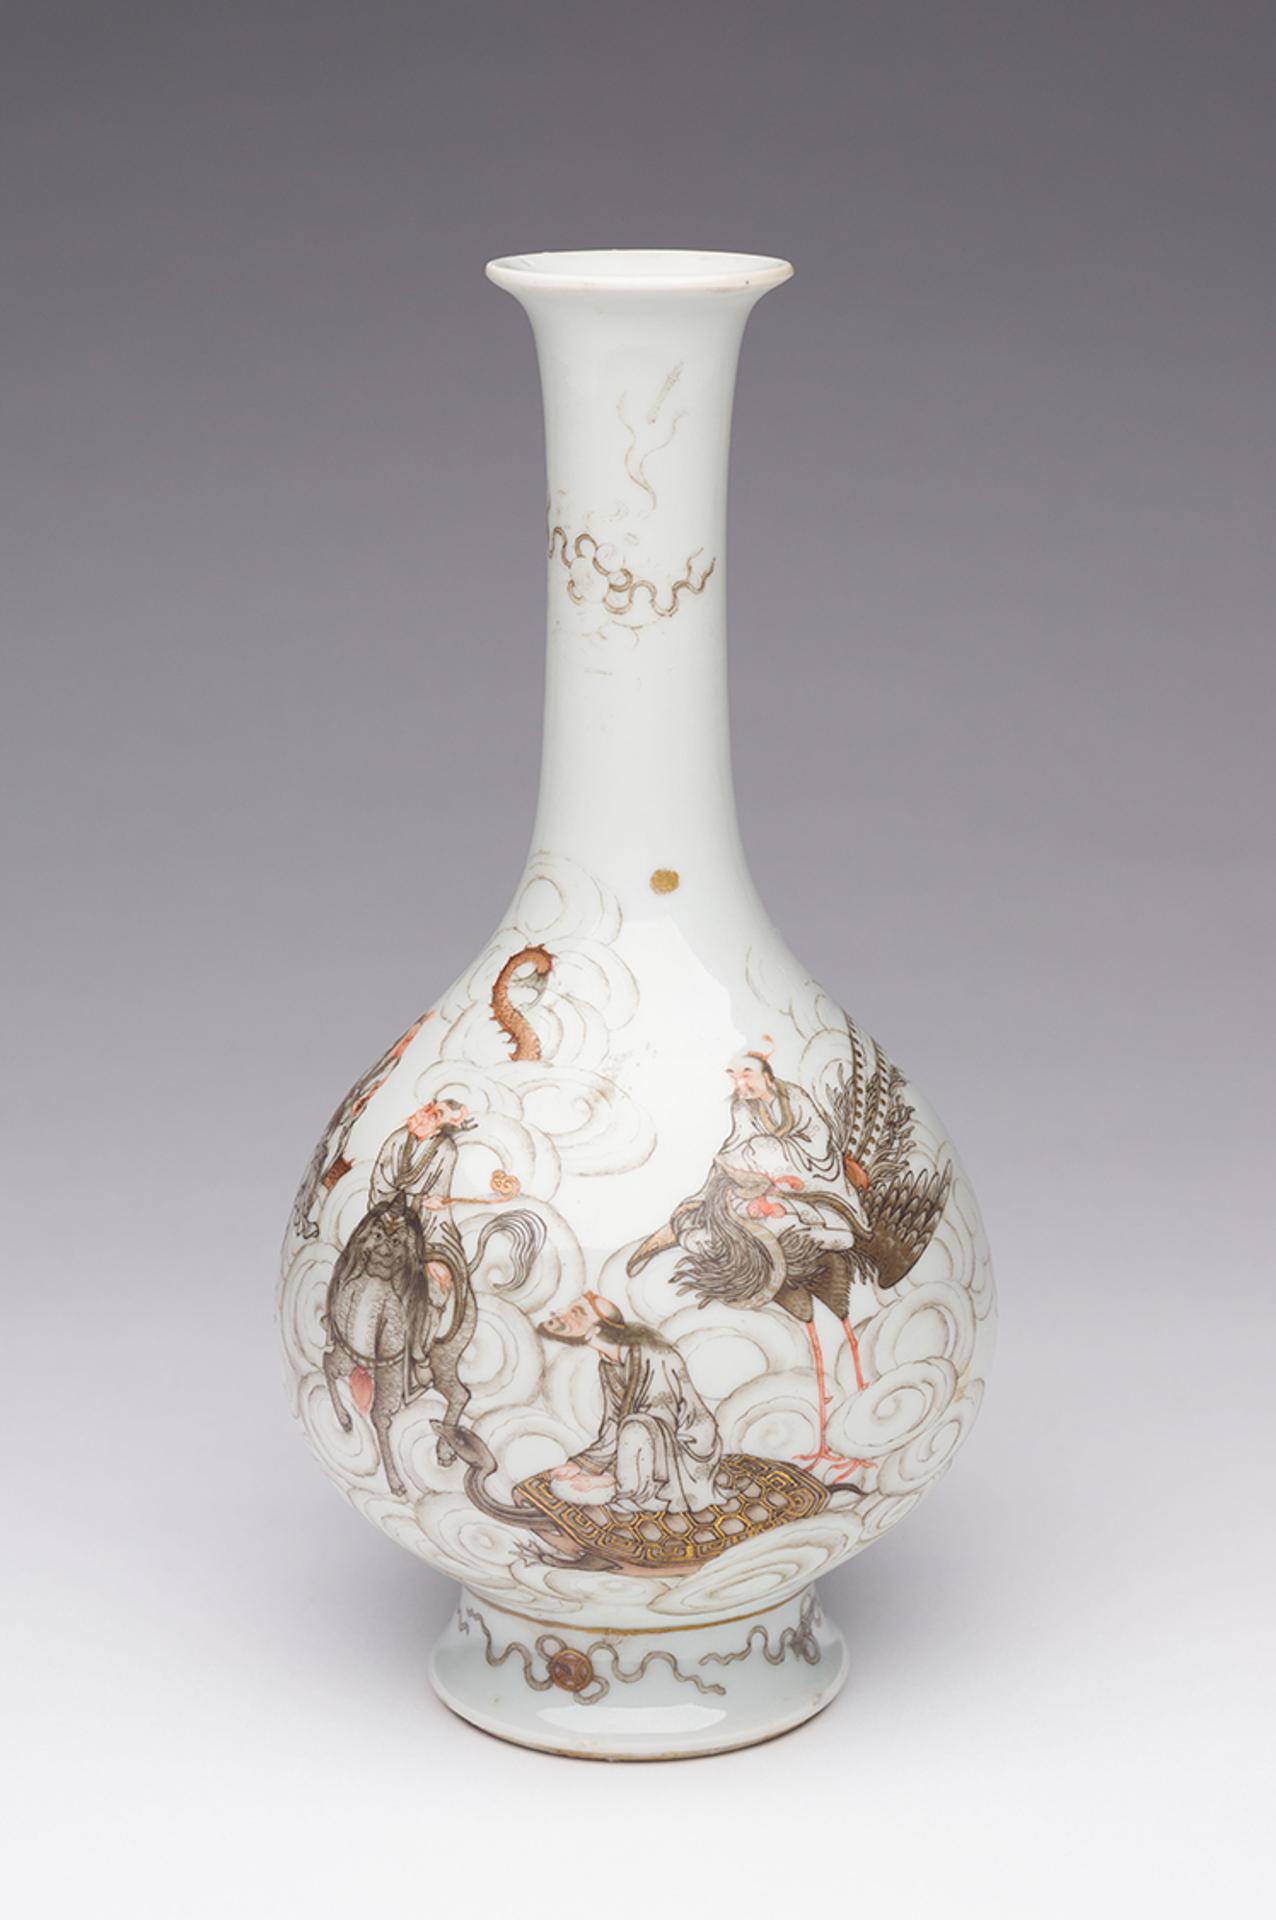 Chinese Art - A Well-Painted Chinese Famille Rose and Grisaille 'Immortals' Bottle Vase, Shende Tang Mark, Republican Period